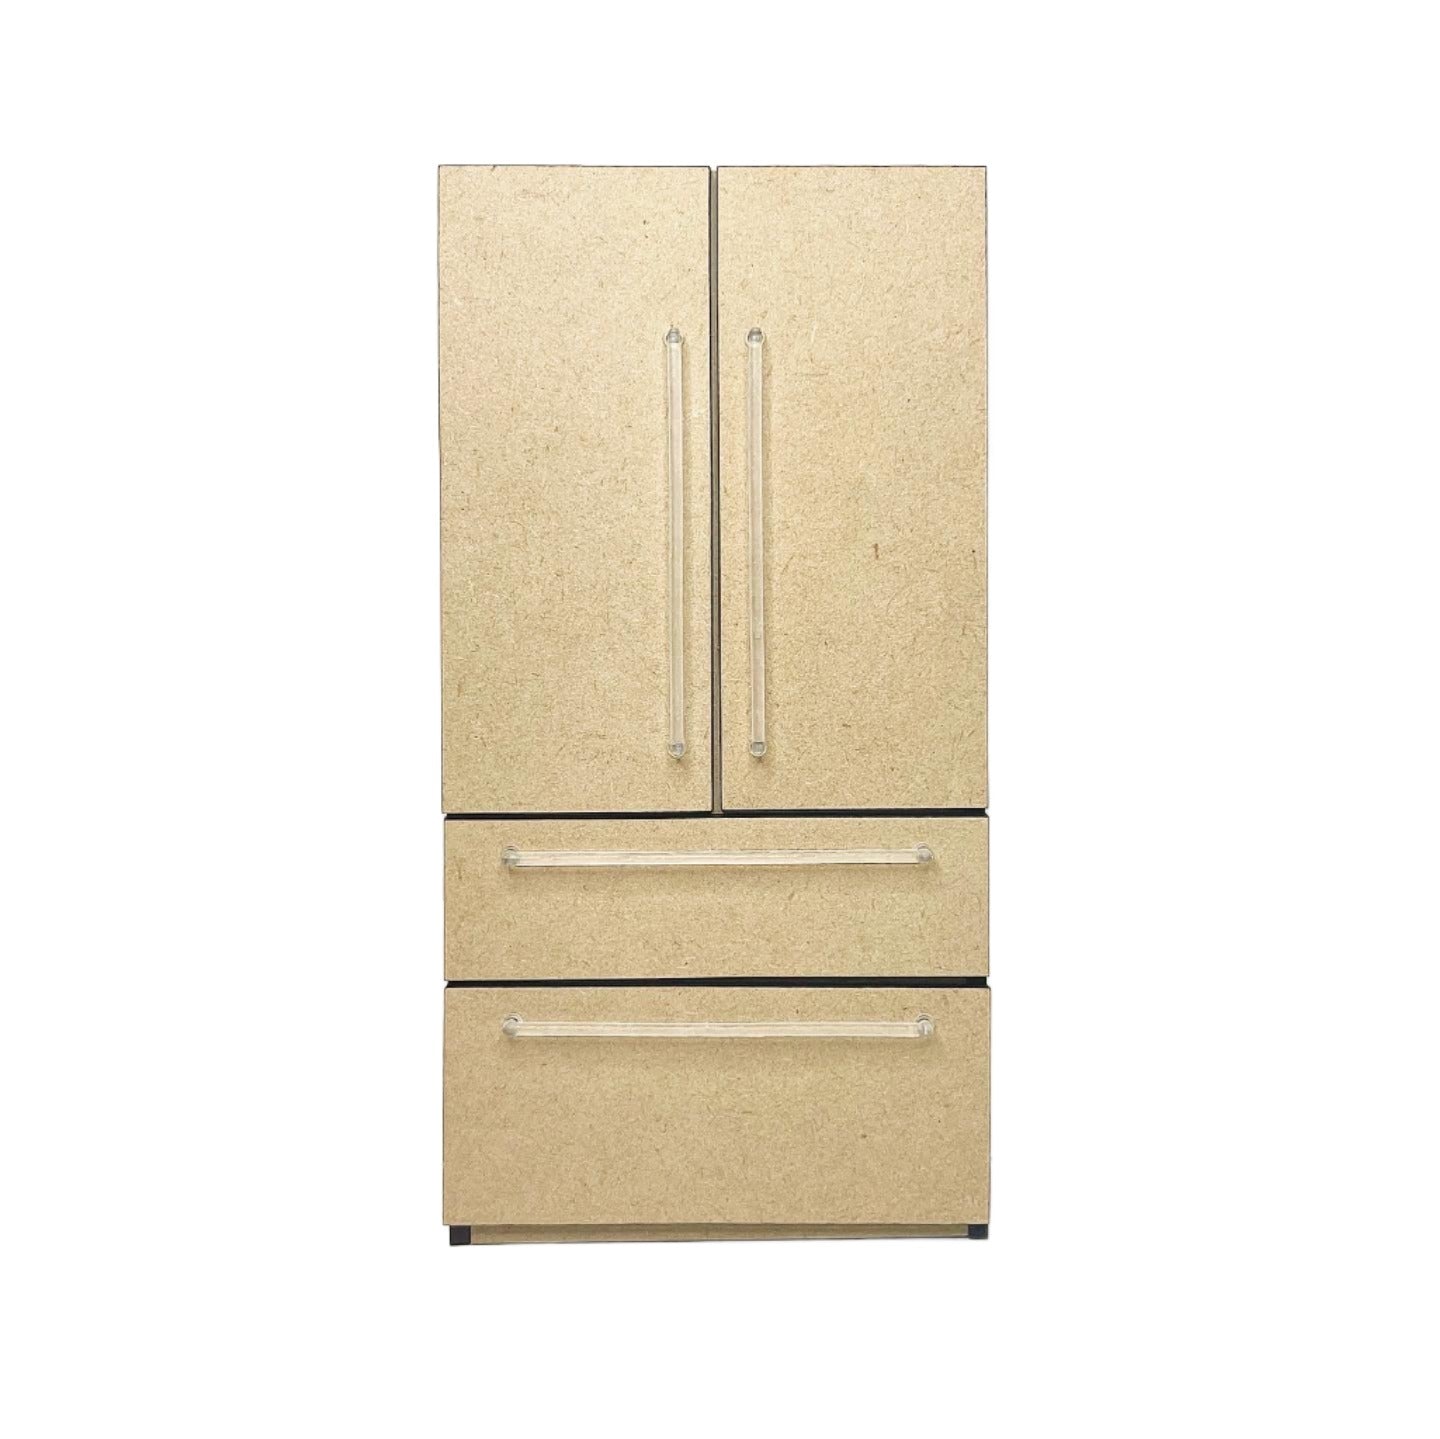 Modern Fridge with Two Drawers